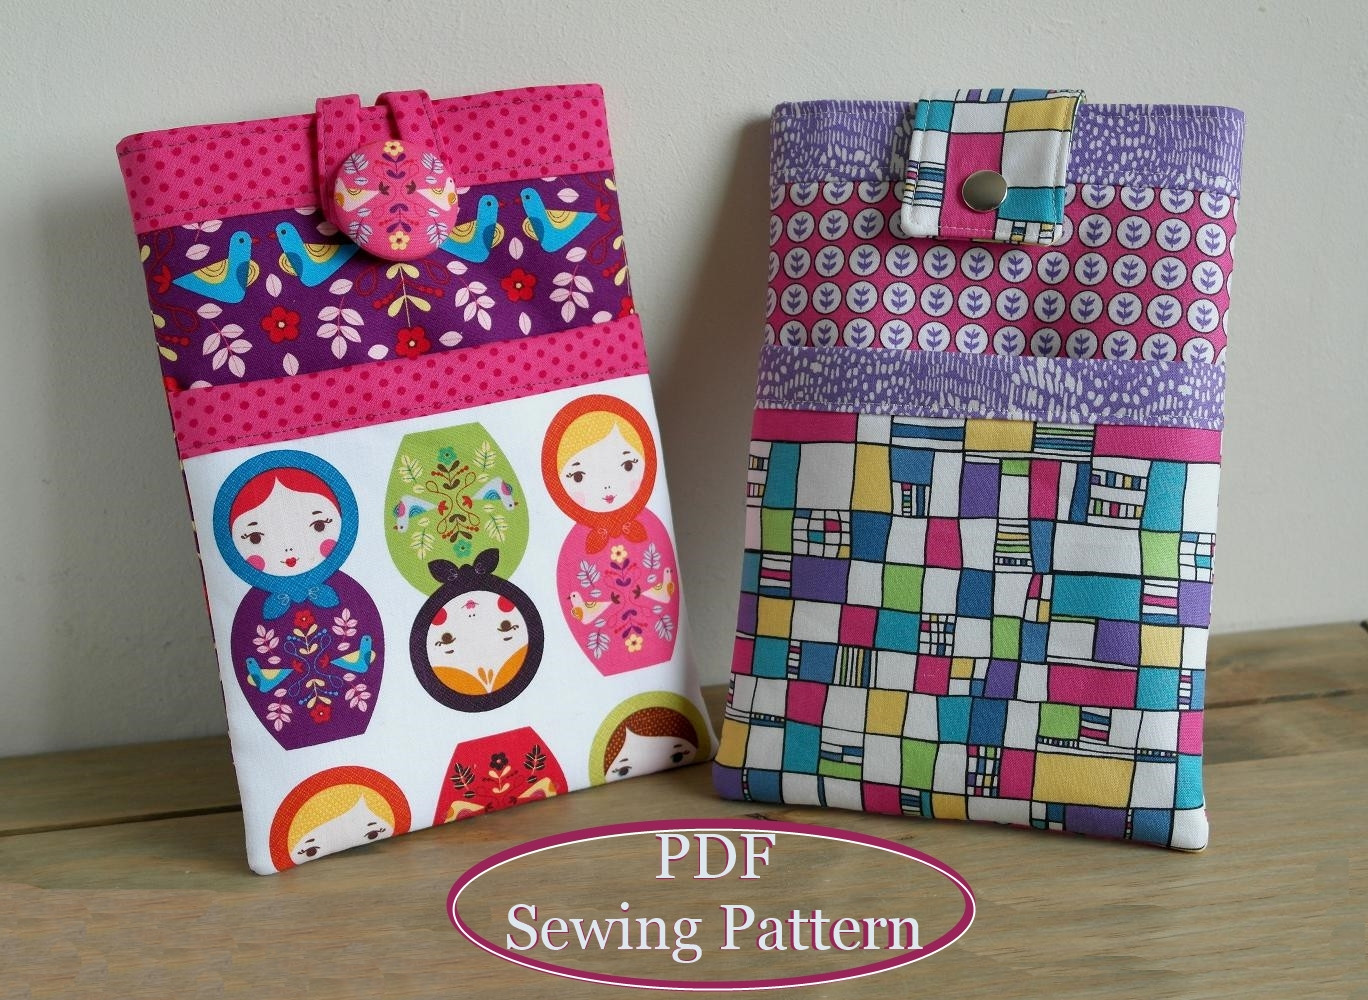 Sewing Christmas Gift Ideas
 Christmas Gift Ideas to Sew for Family and Friends